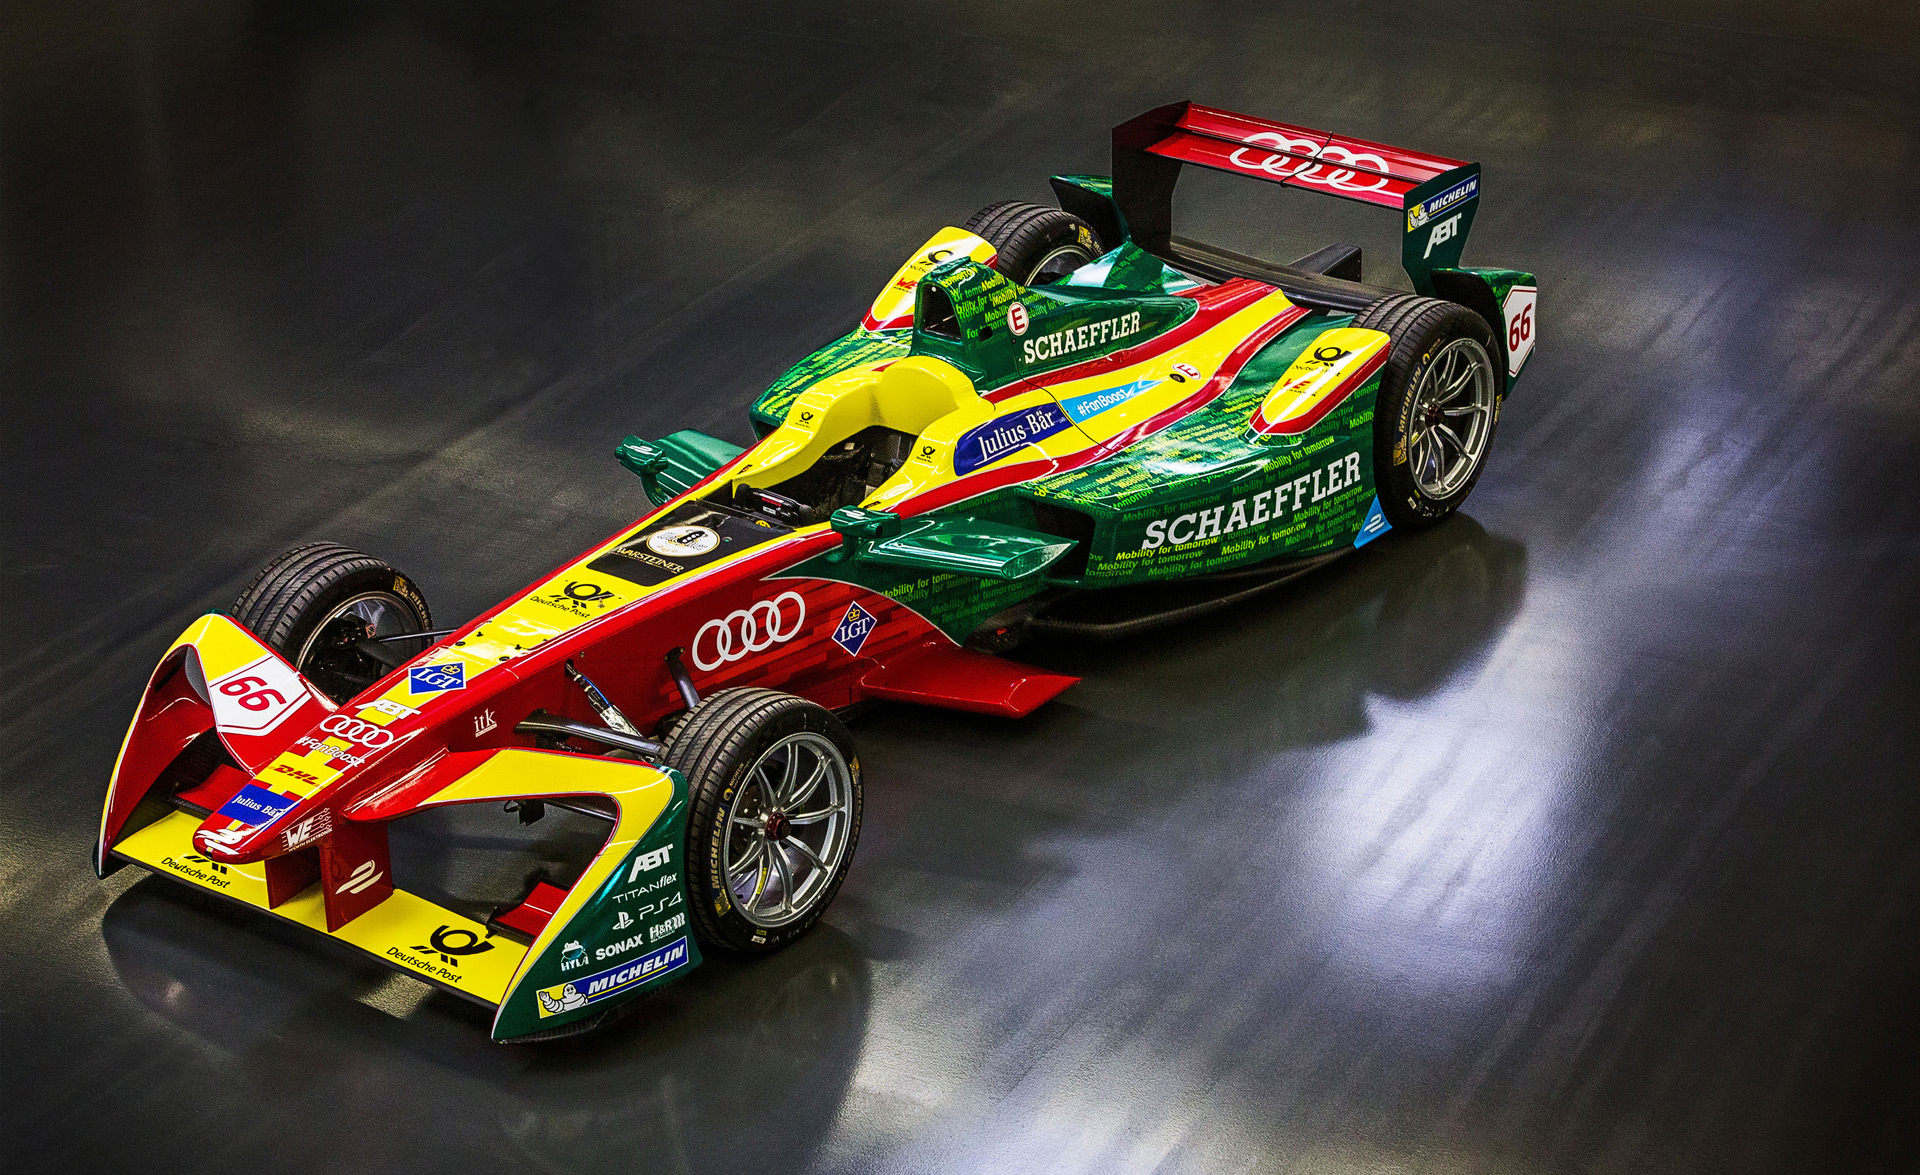 Audi to race in Formula E from 2017